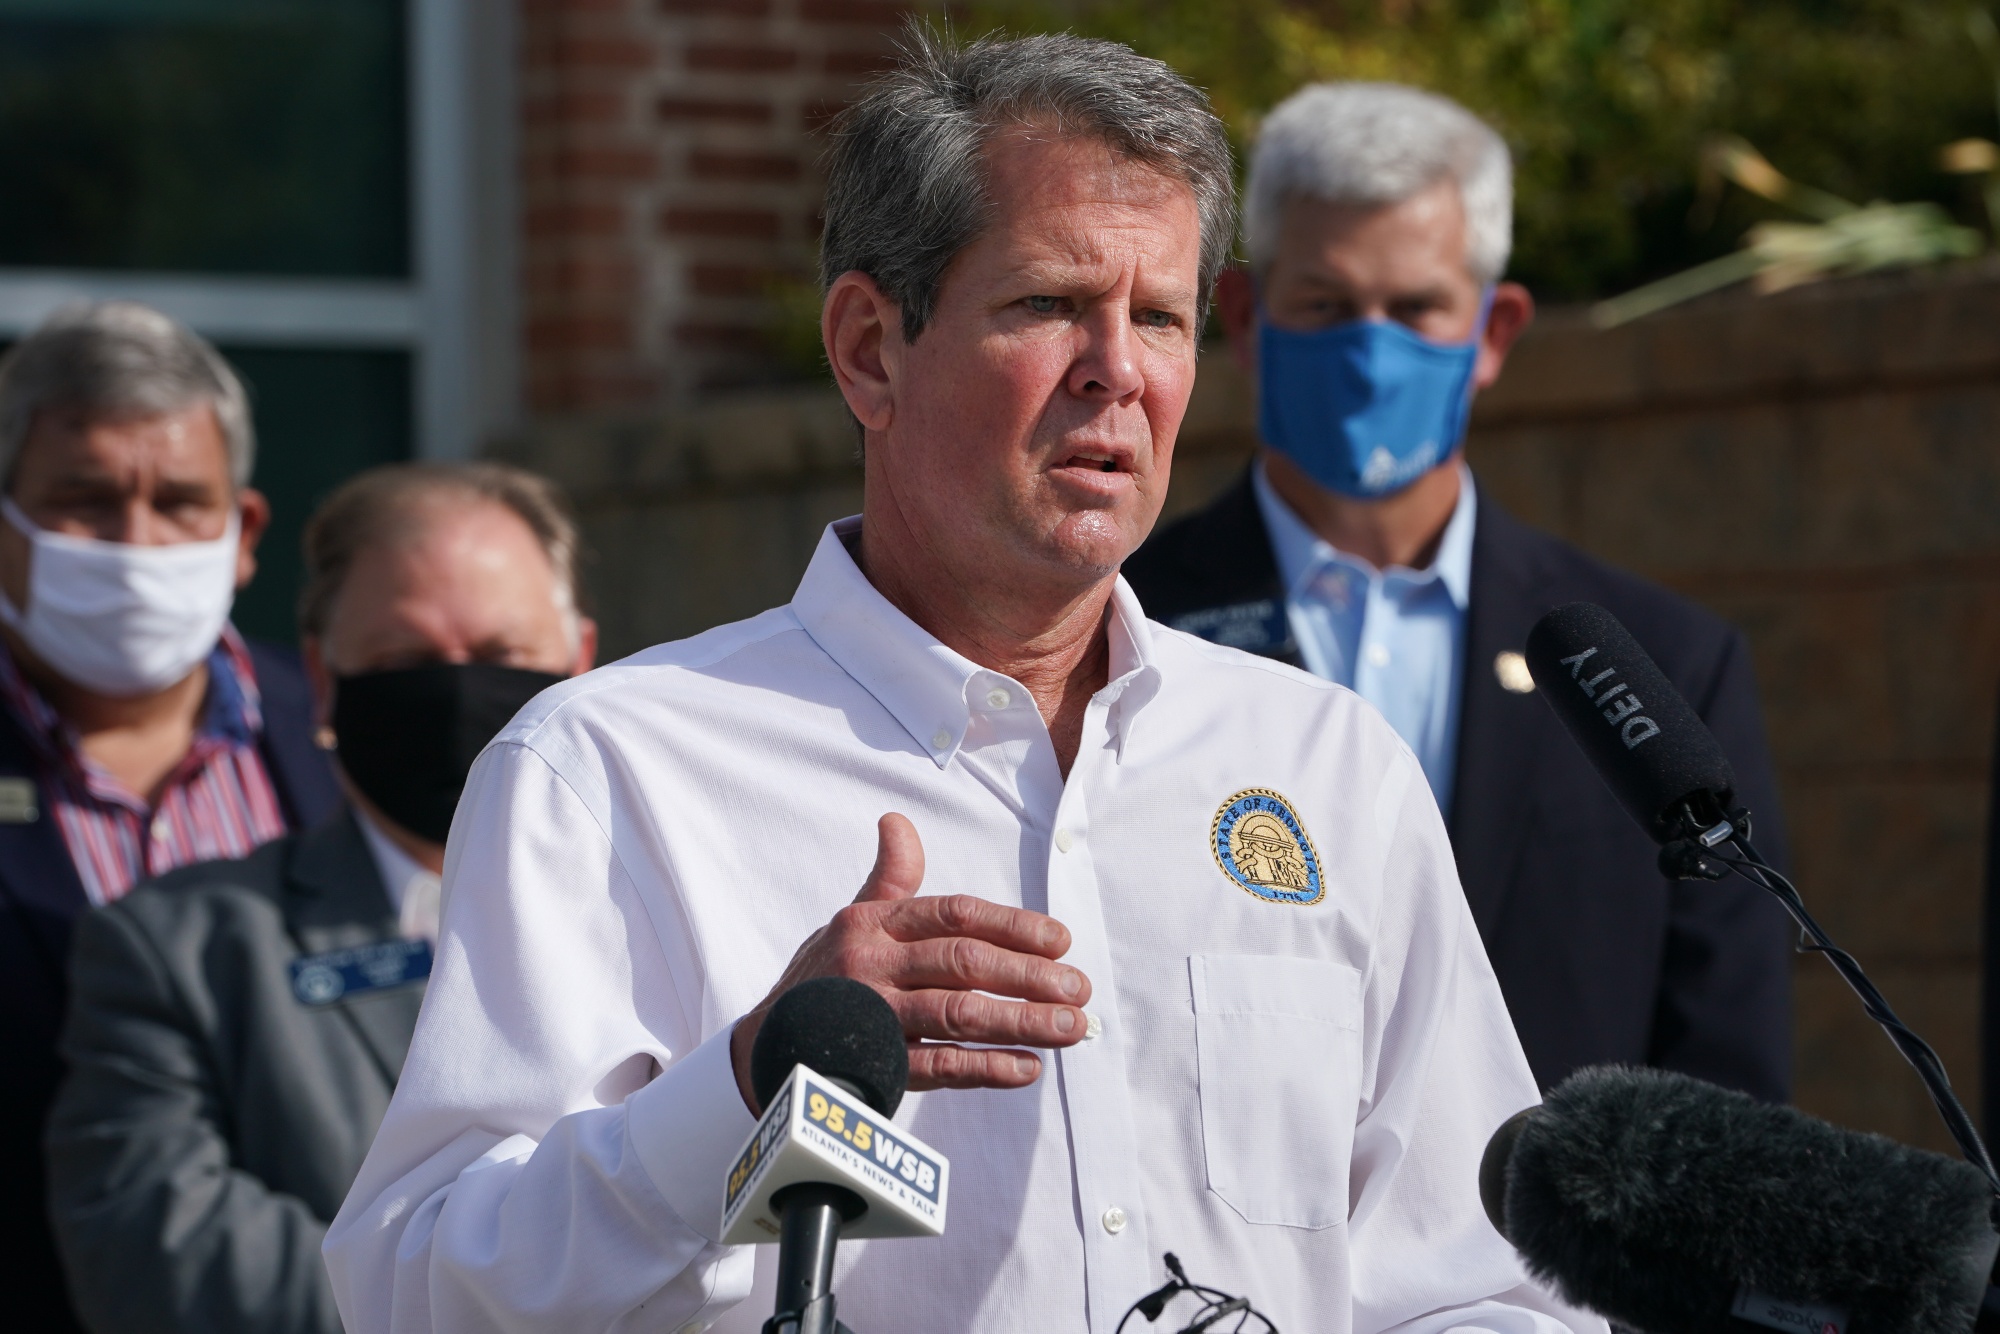 Brian Kemp speaks during a ‘Wear A Mask’ tour stop in Dalton, Georgia on July 2.